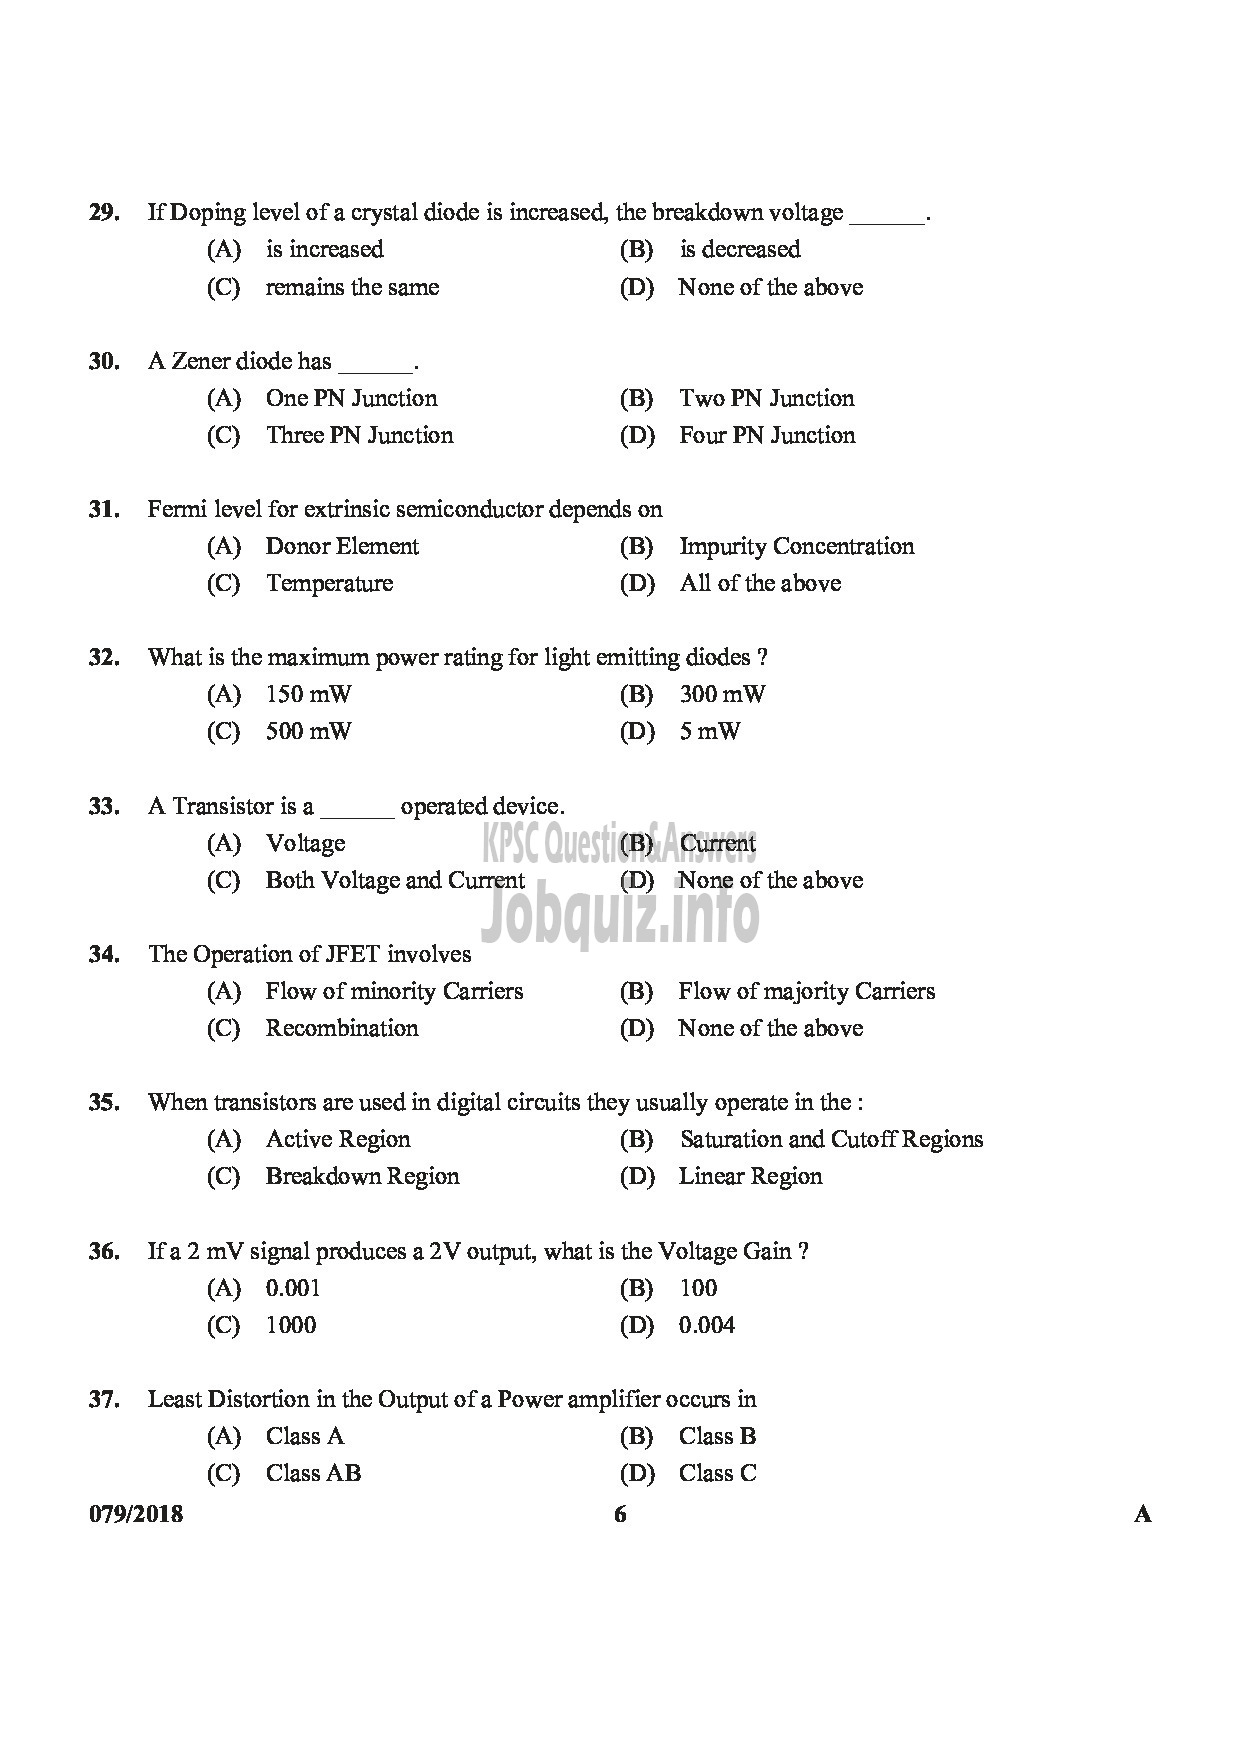 Kerala PSC Question Paper - JUNIOR INSTRUCTOR ELECTRONIC MECHANIC INDUSTRIAL TRAINING-6